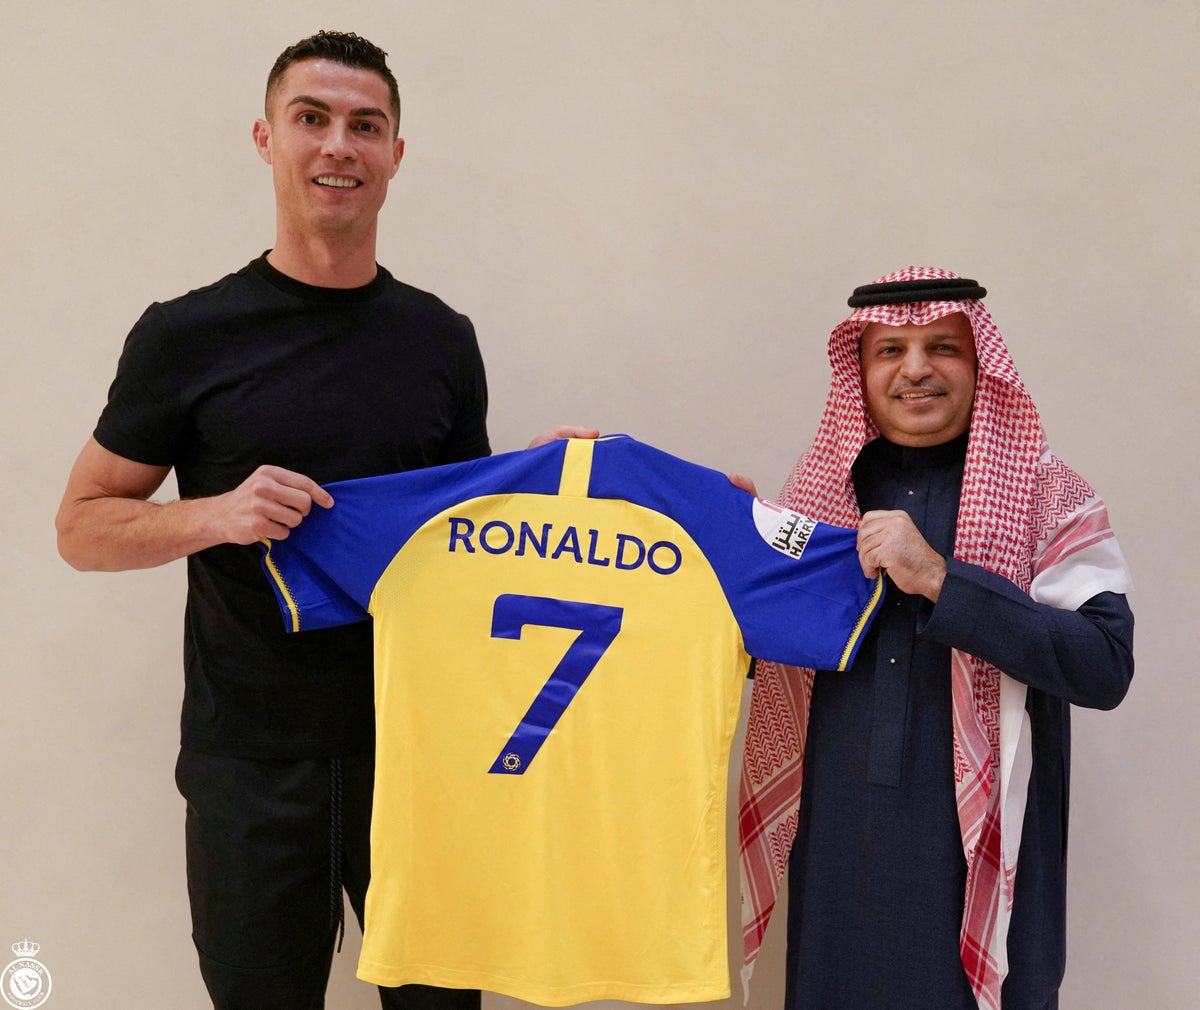 Cristiano Ronaldo unveiling LIVE: Al-Nassr set to announce signing of 37-year-old striker